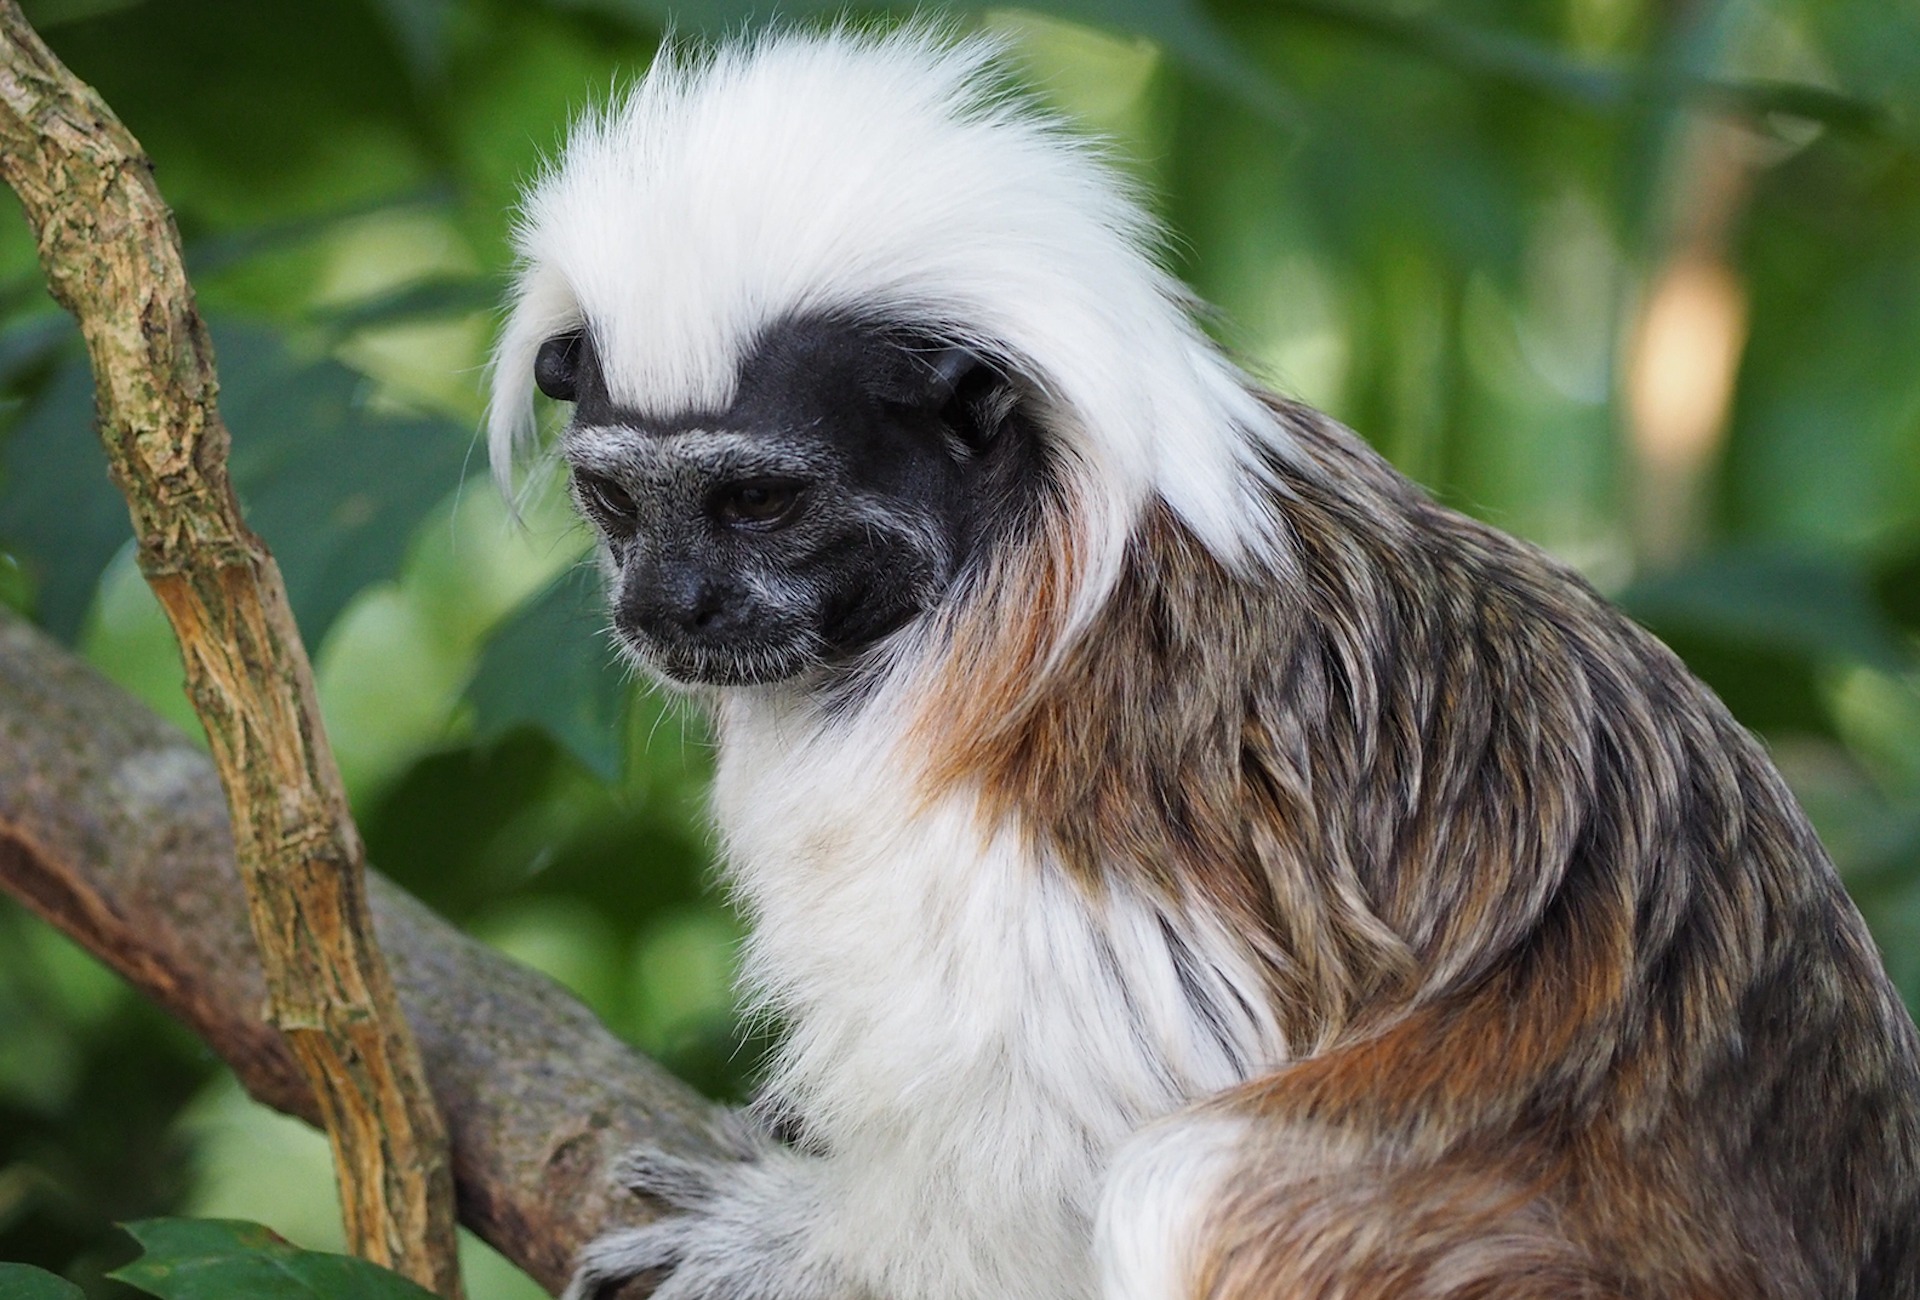 The Cotton-top Tamarin, by pxfuel/Creative Commons